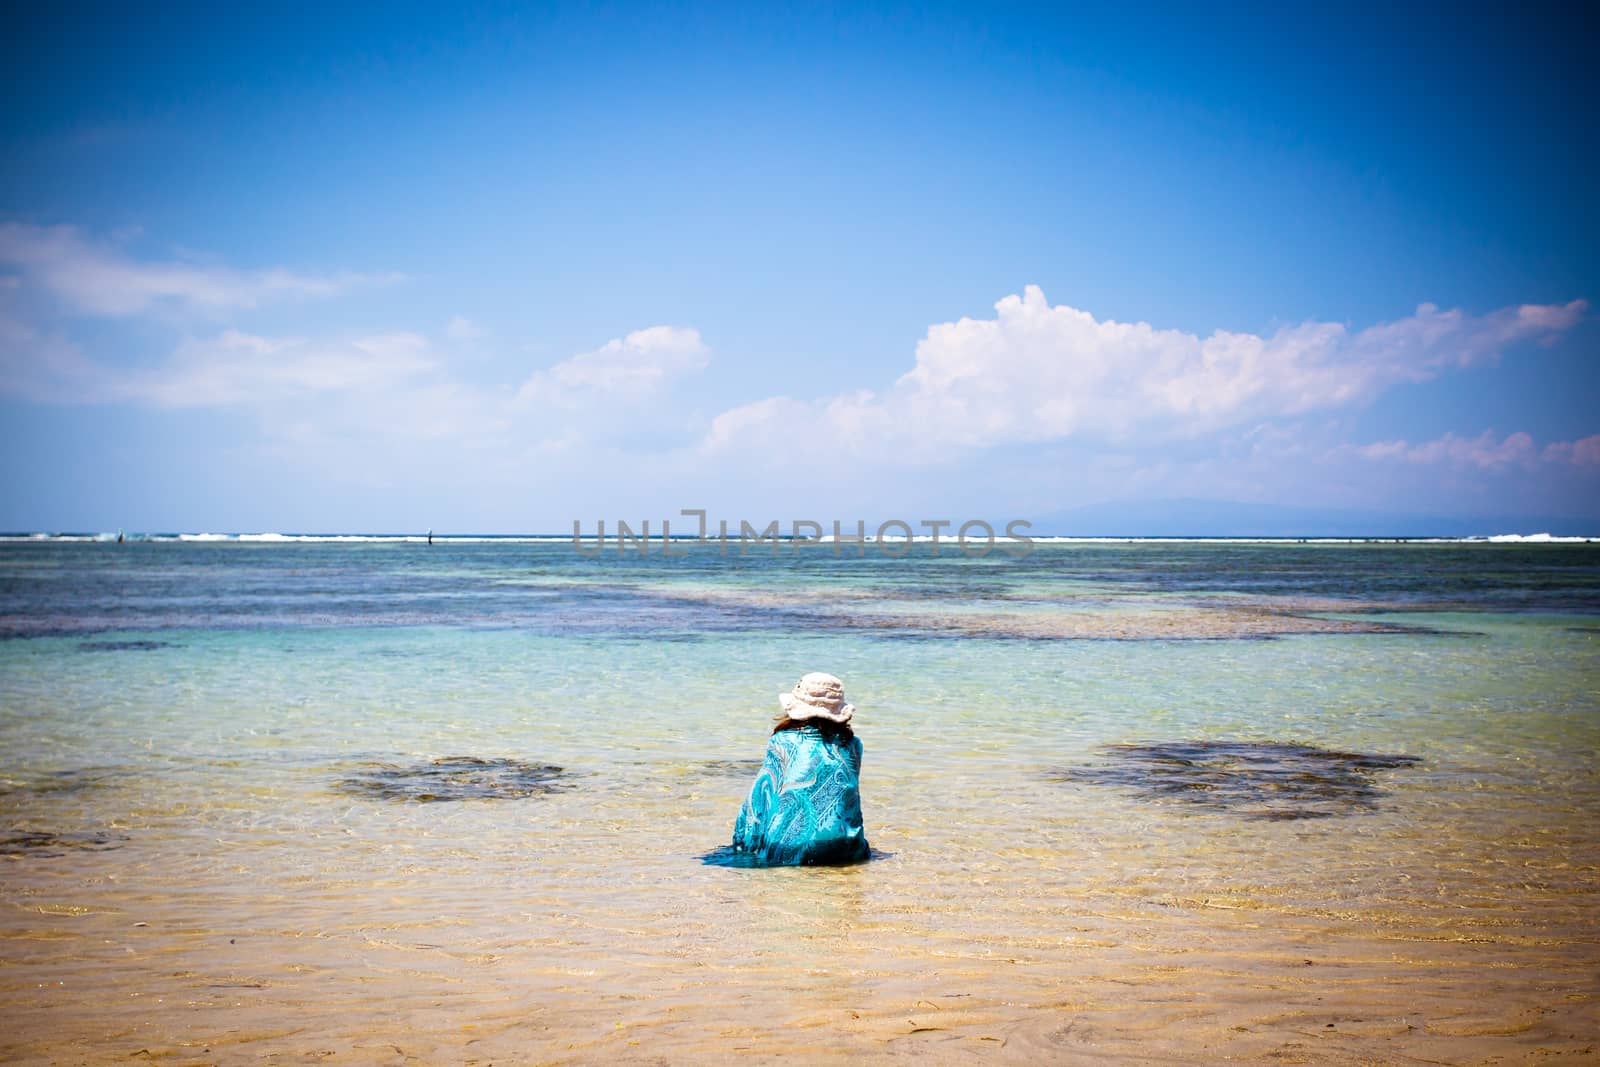 Beach scene with woman relaxing looking out to sea on a Sanur beach in Bali, Indonesia